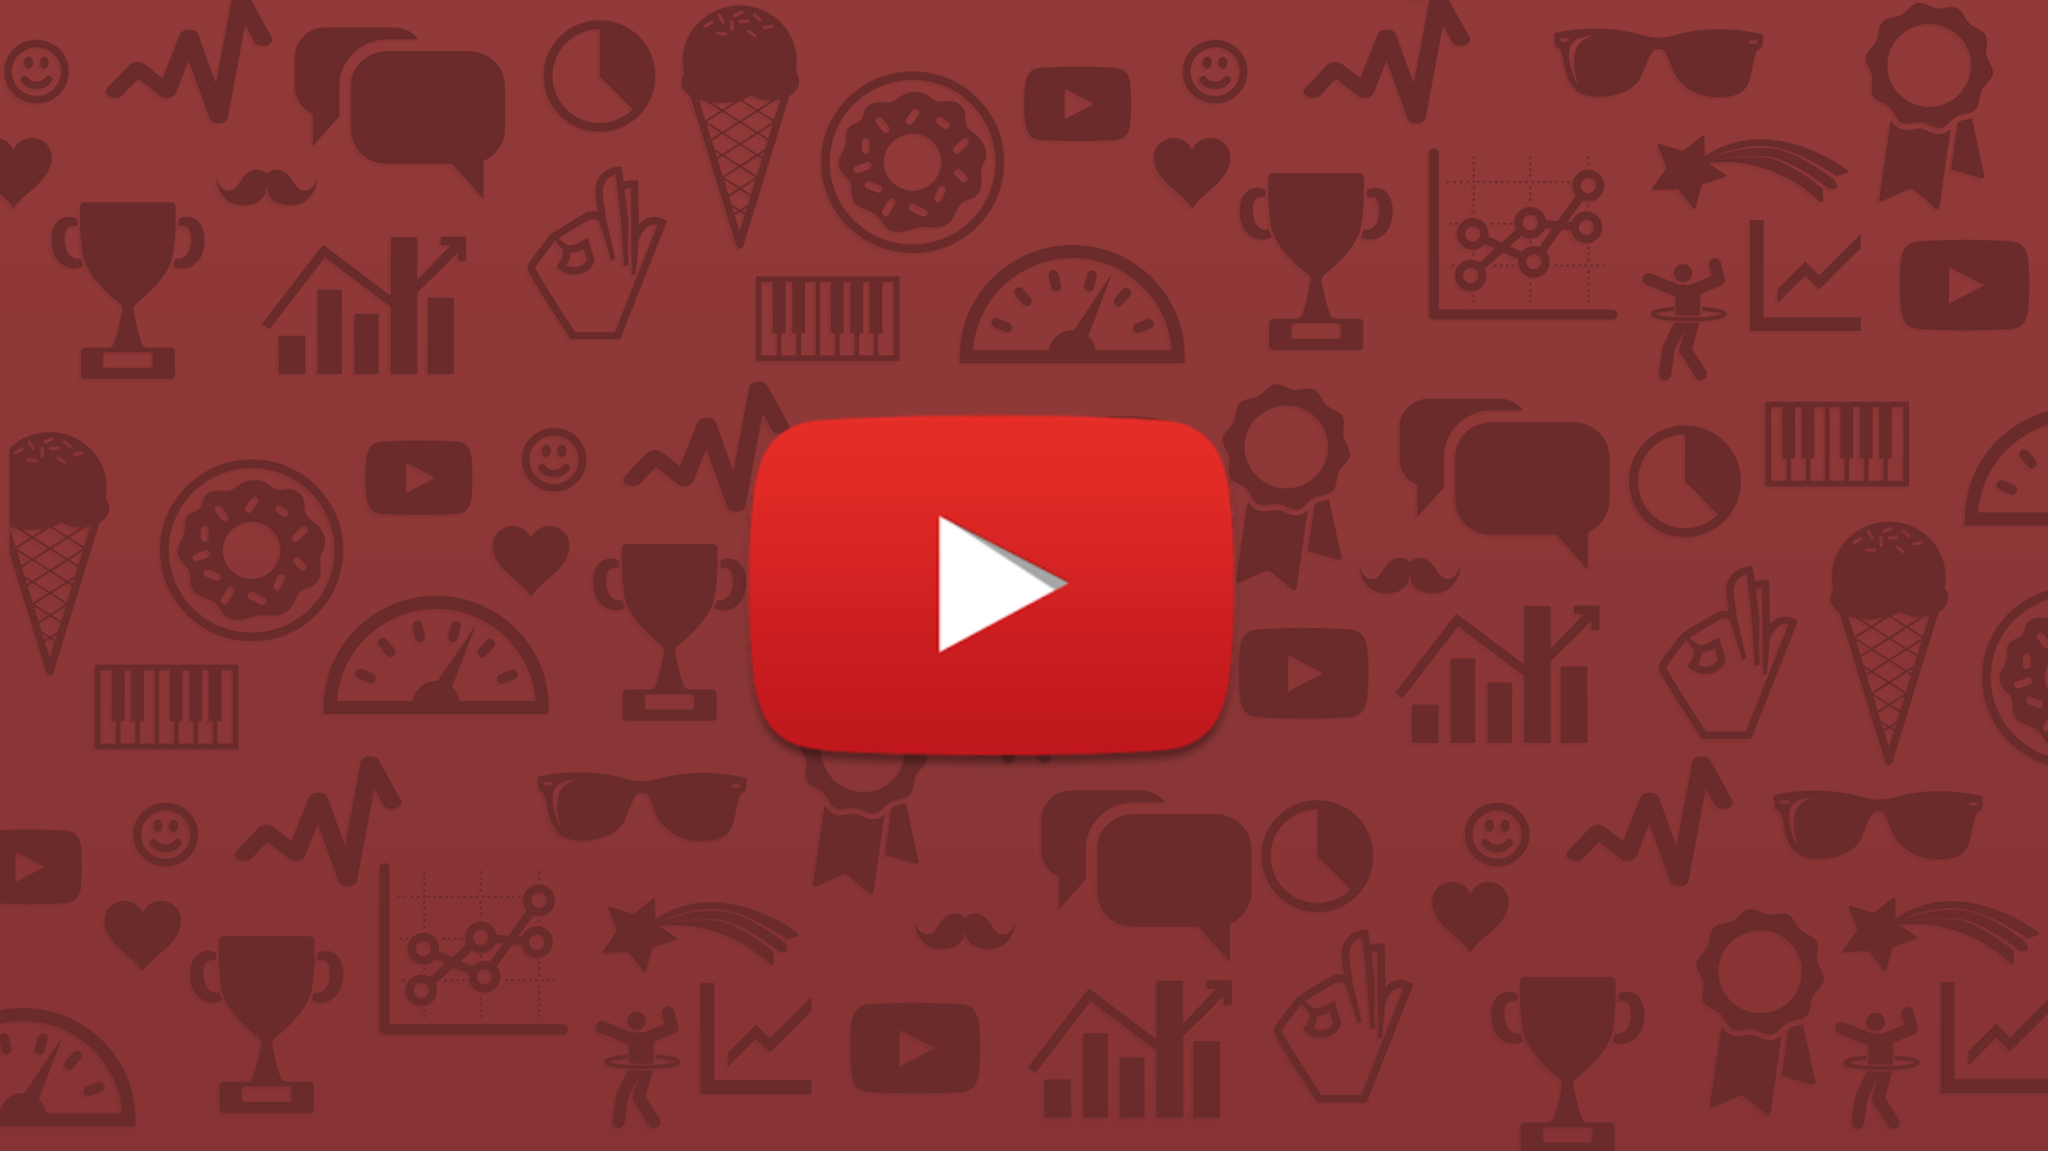 YouTube Wallpaper. YouTube Wallpaper, Awesome YouTube Background and Cute YouTube Background